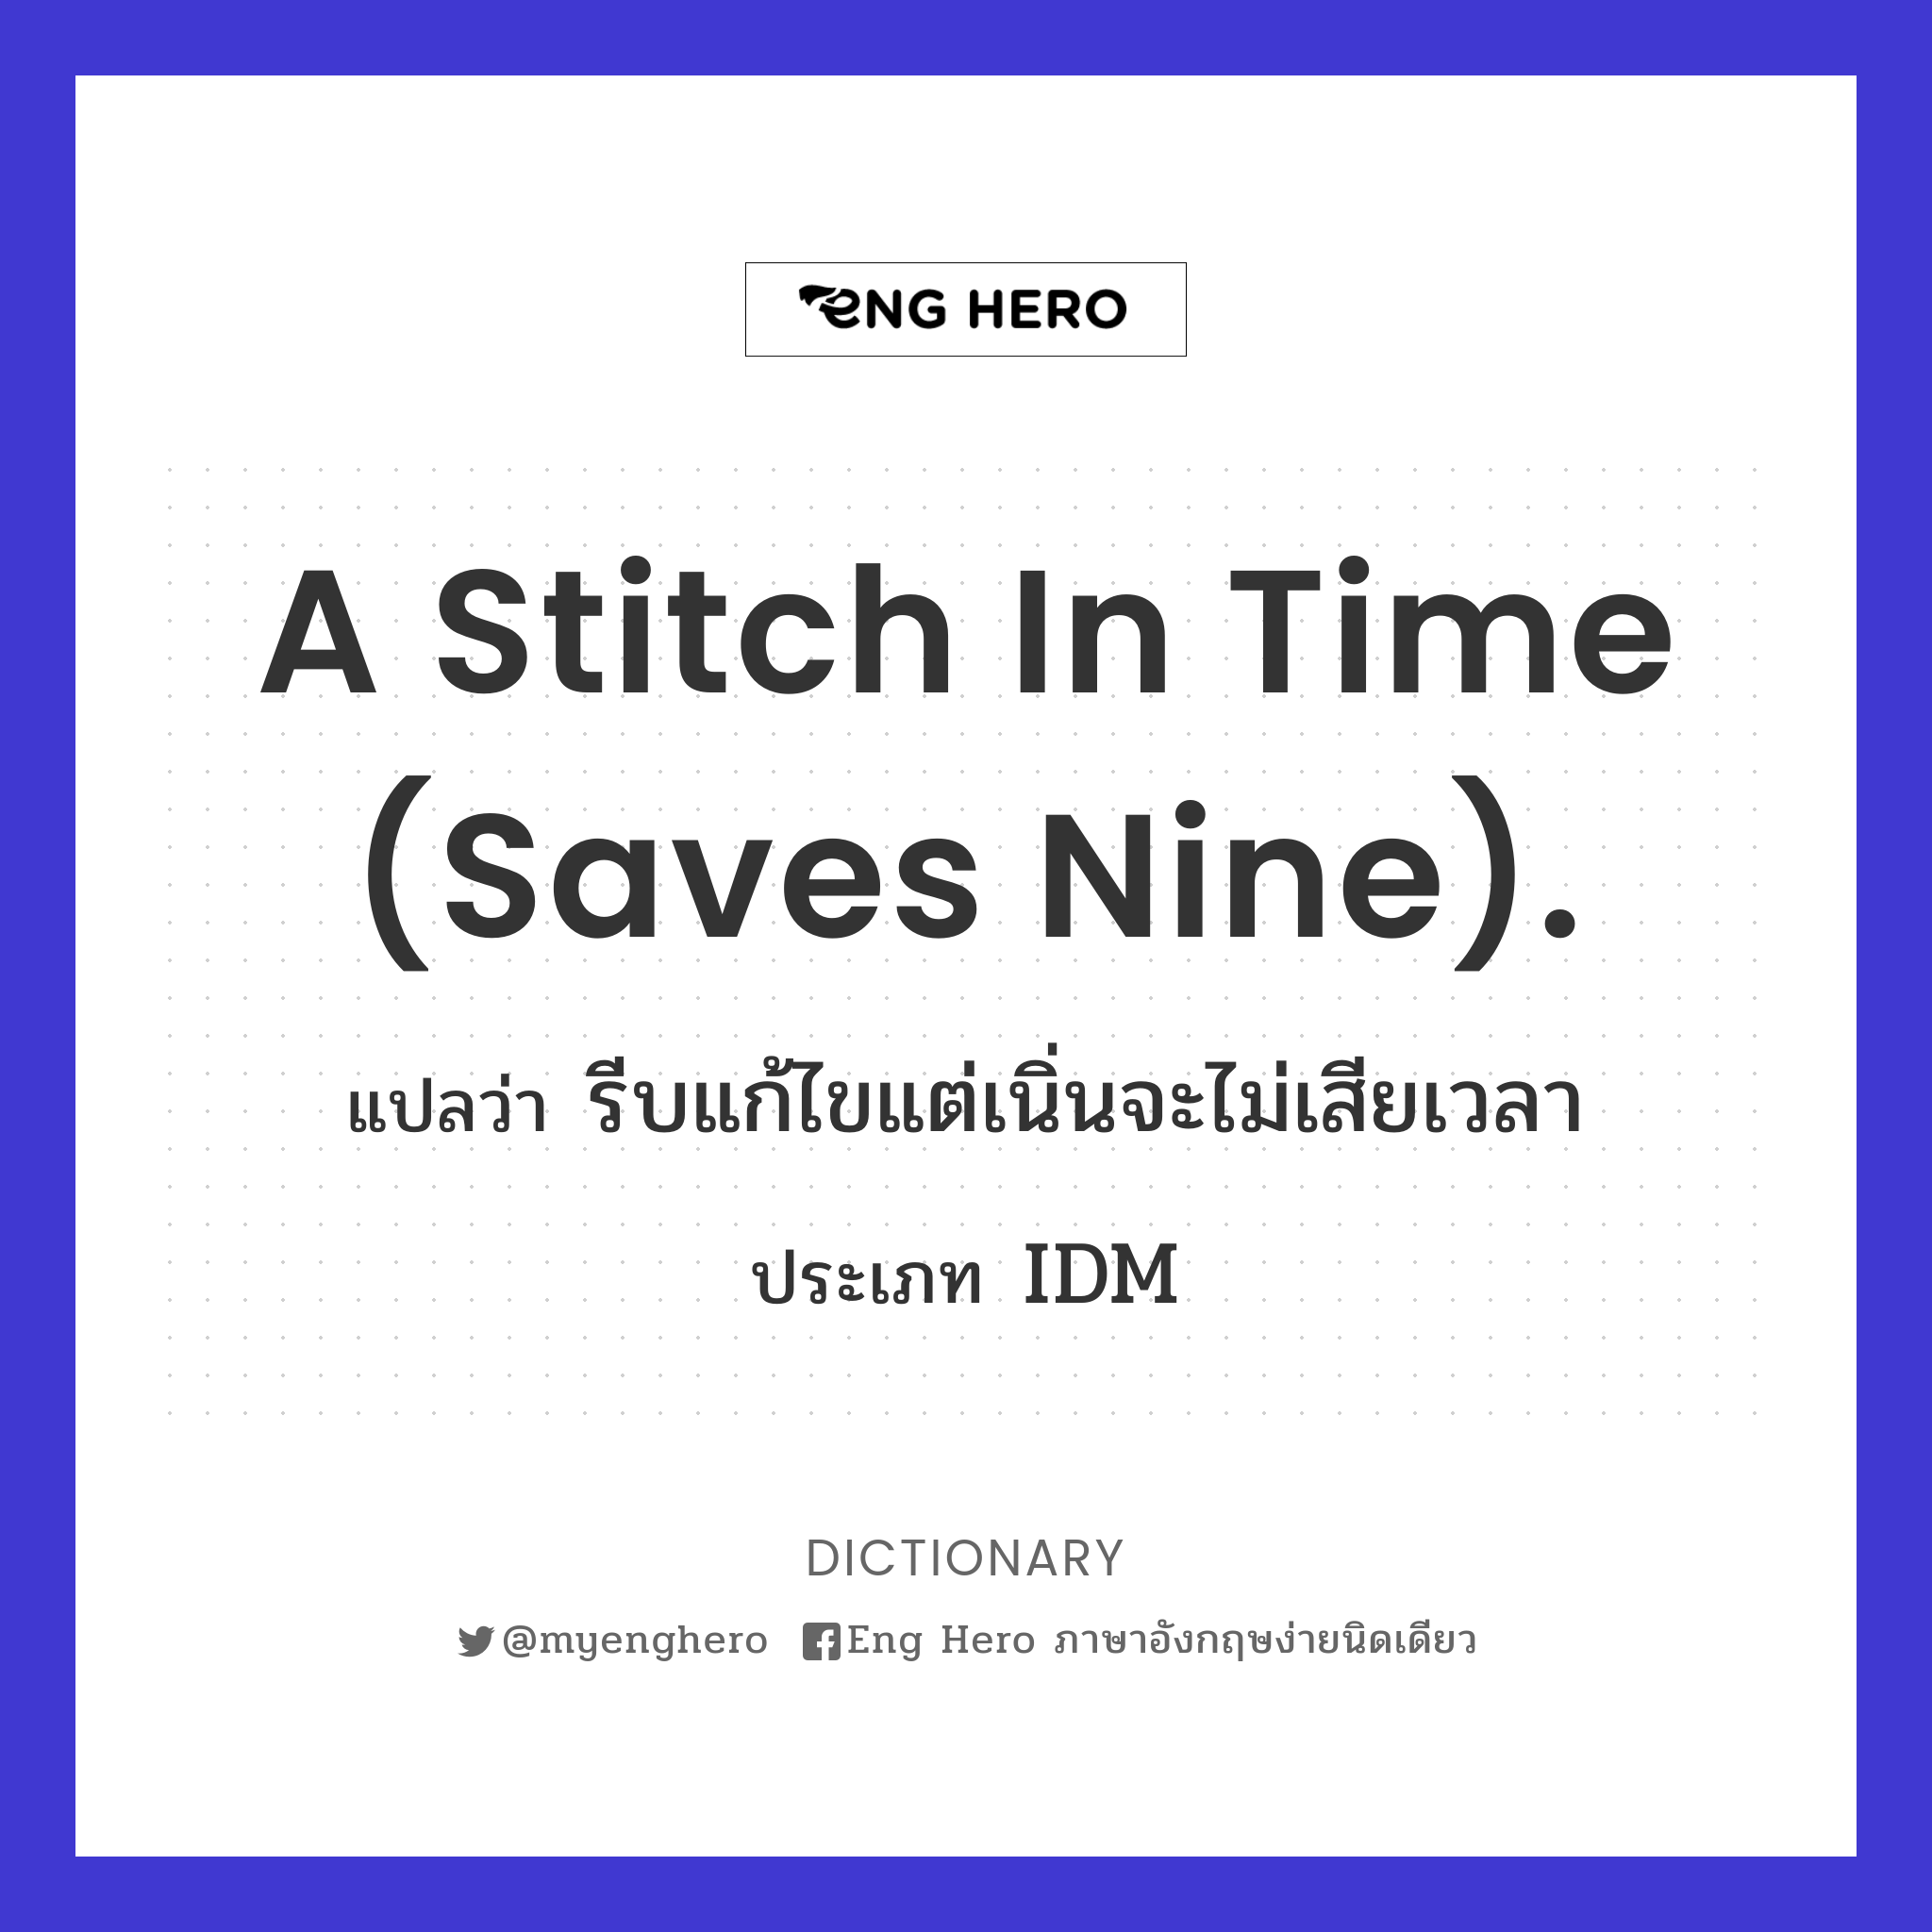 A stitch in time (saves nine).